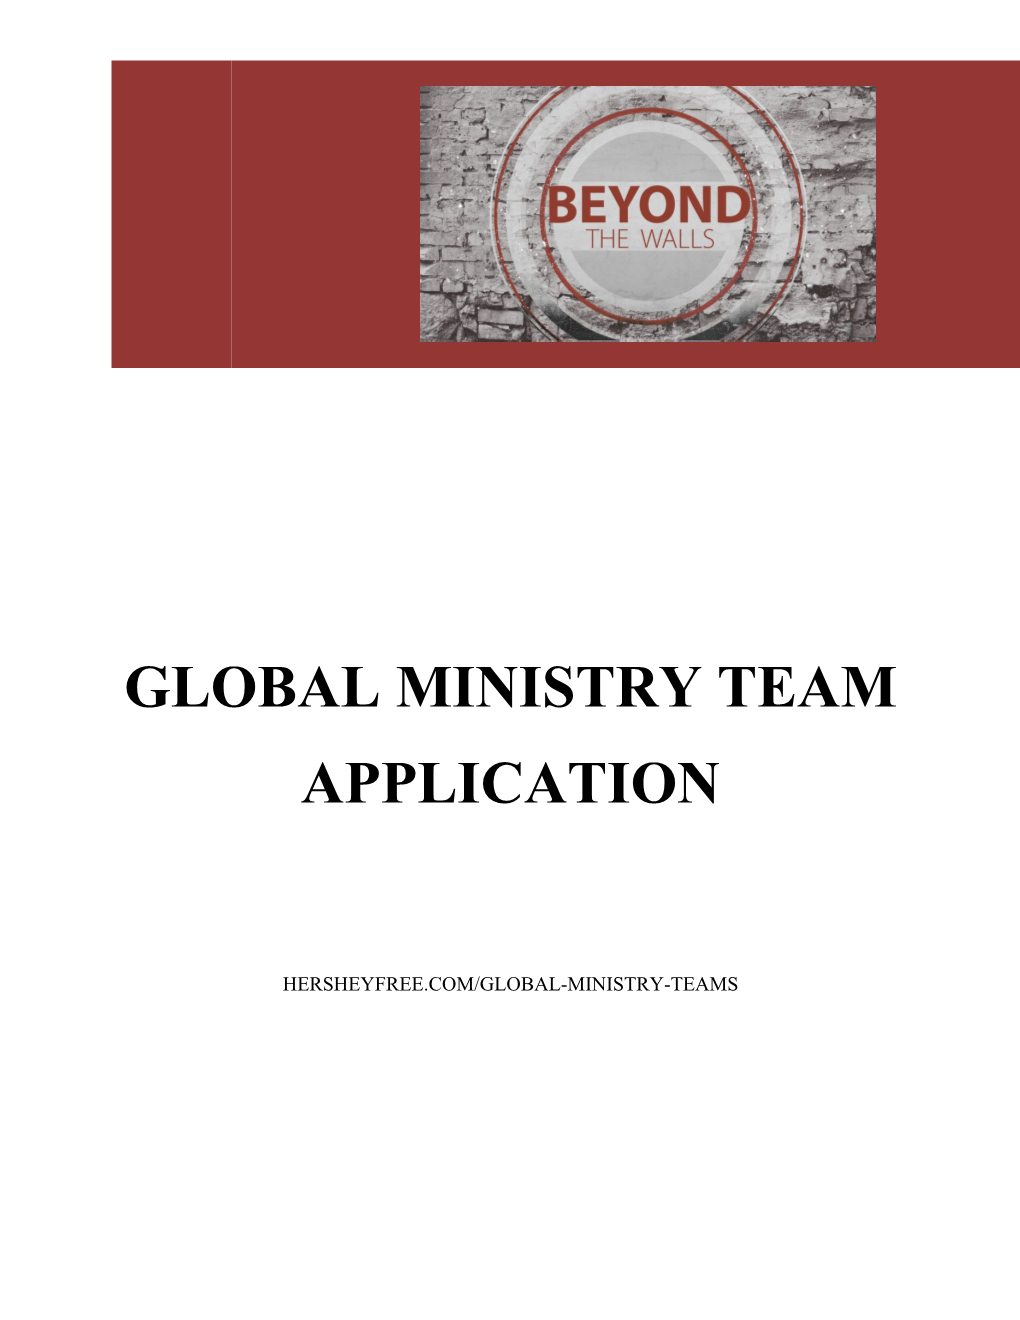 Application for Global Ministry Teams